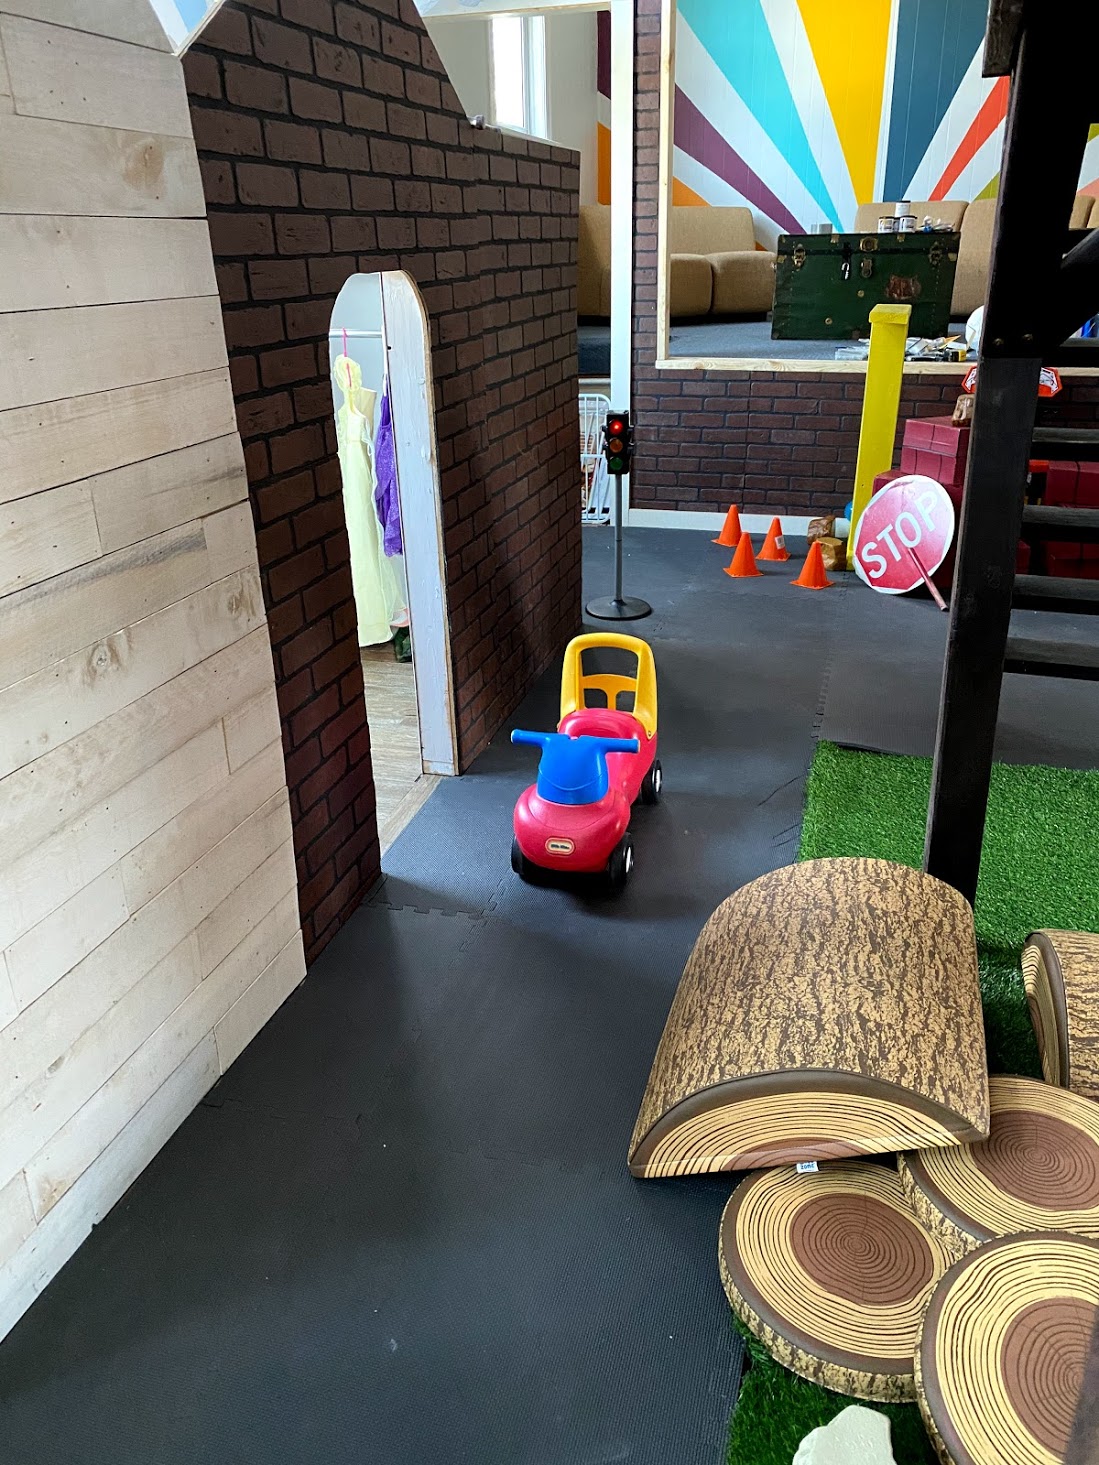 Seating area for parents in Kid City.